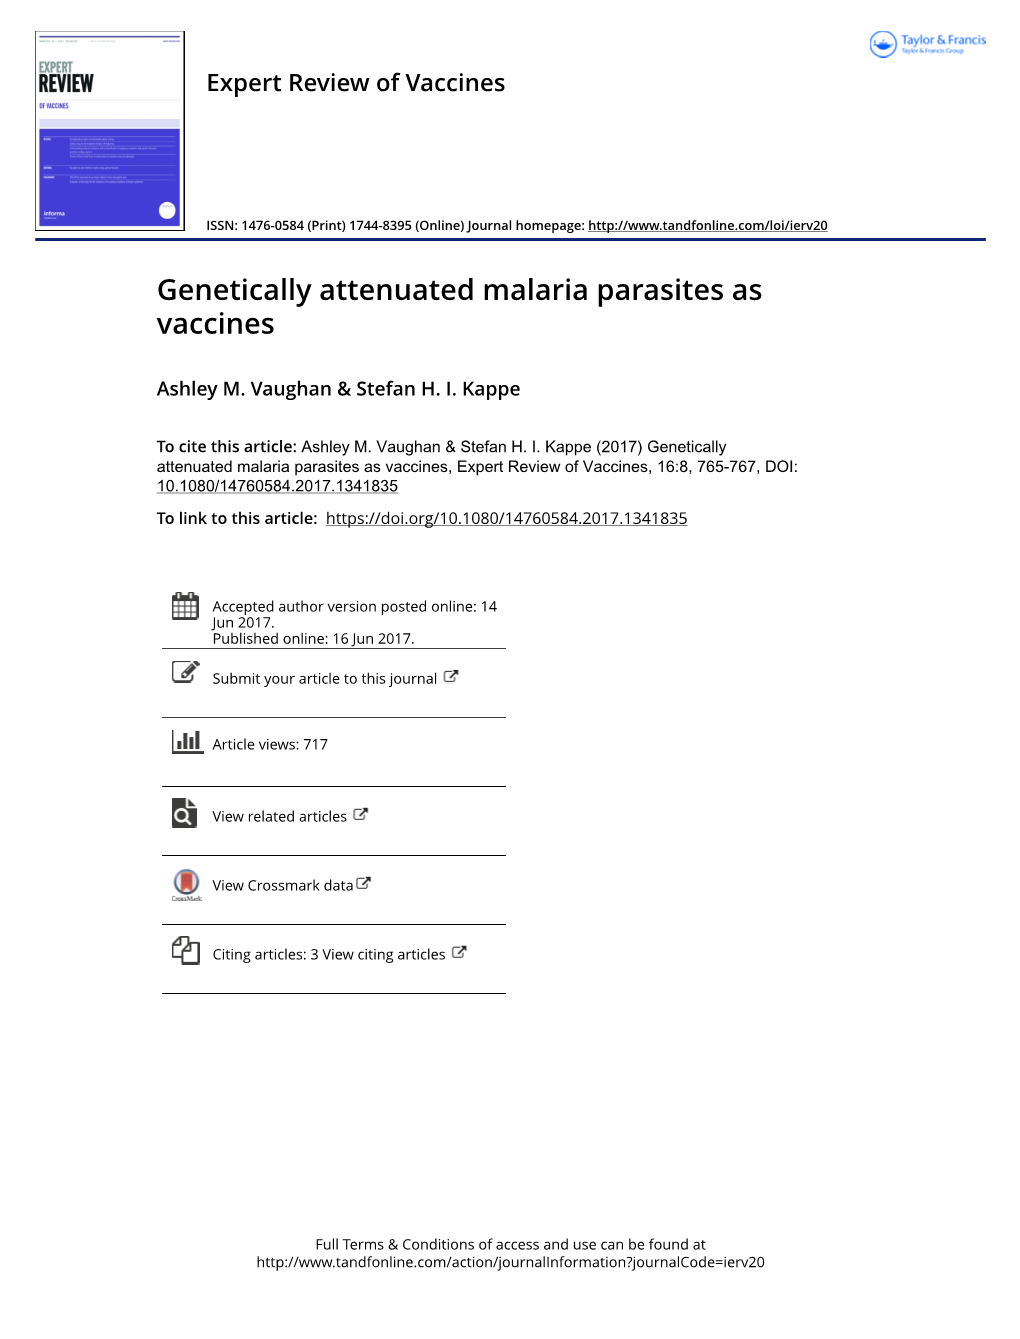 Genetically Attenuated Malaria Parasites As Vaccines